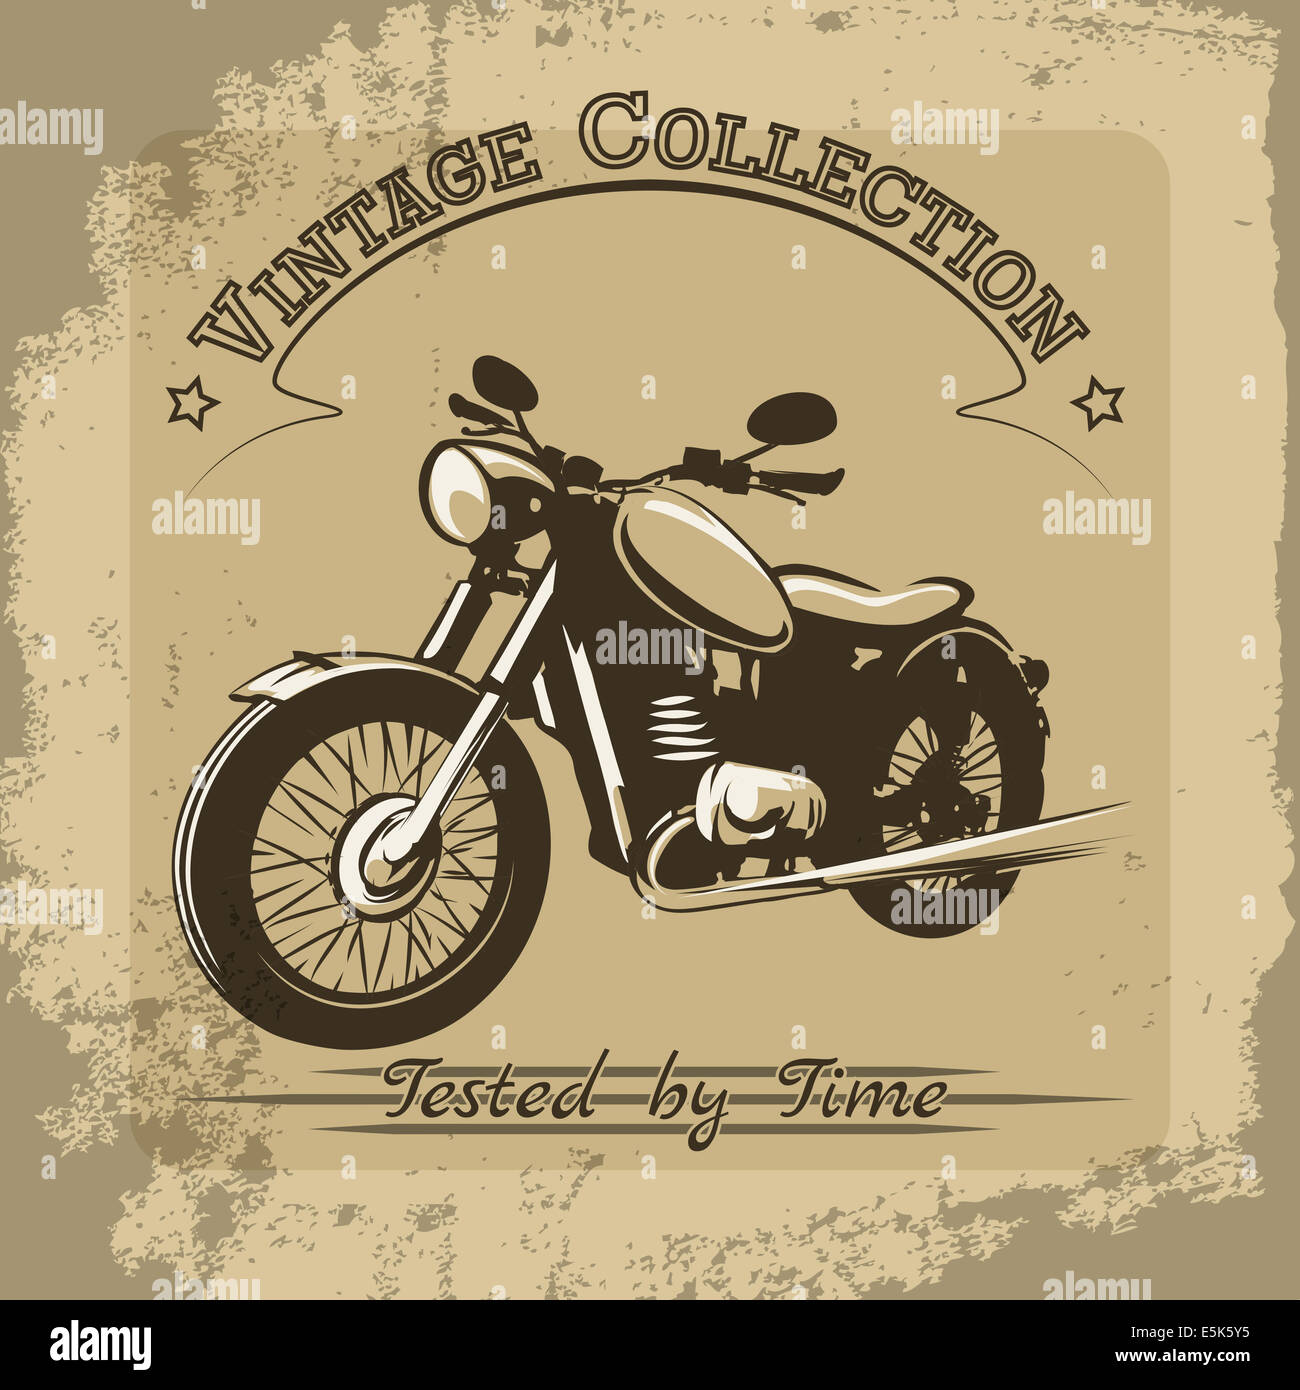 Vintage motorcycle poster Stock Photo